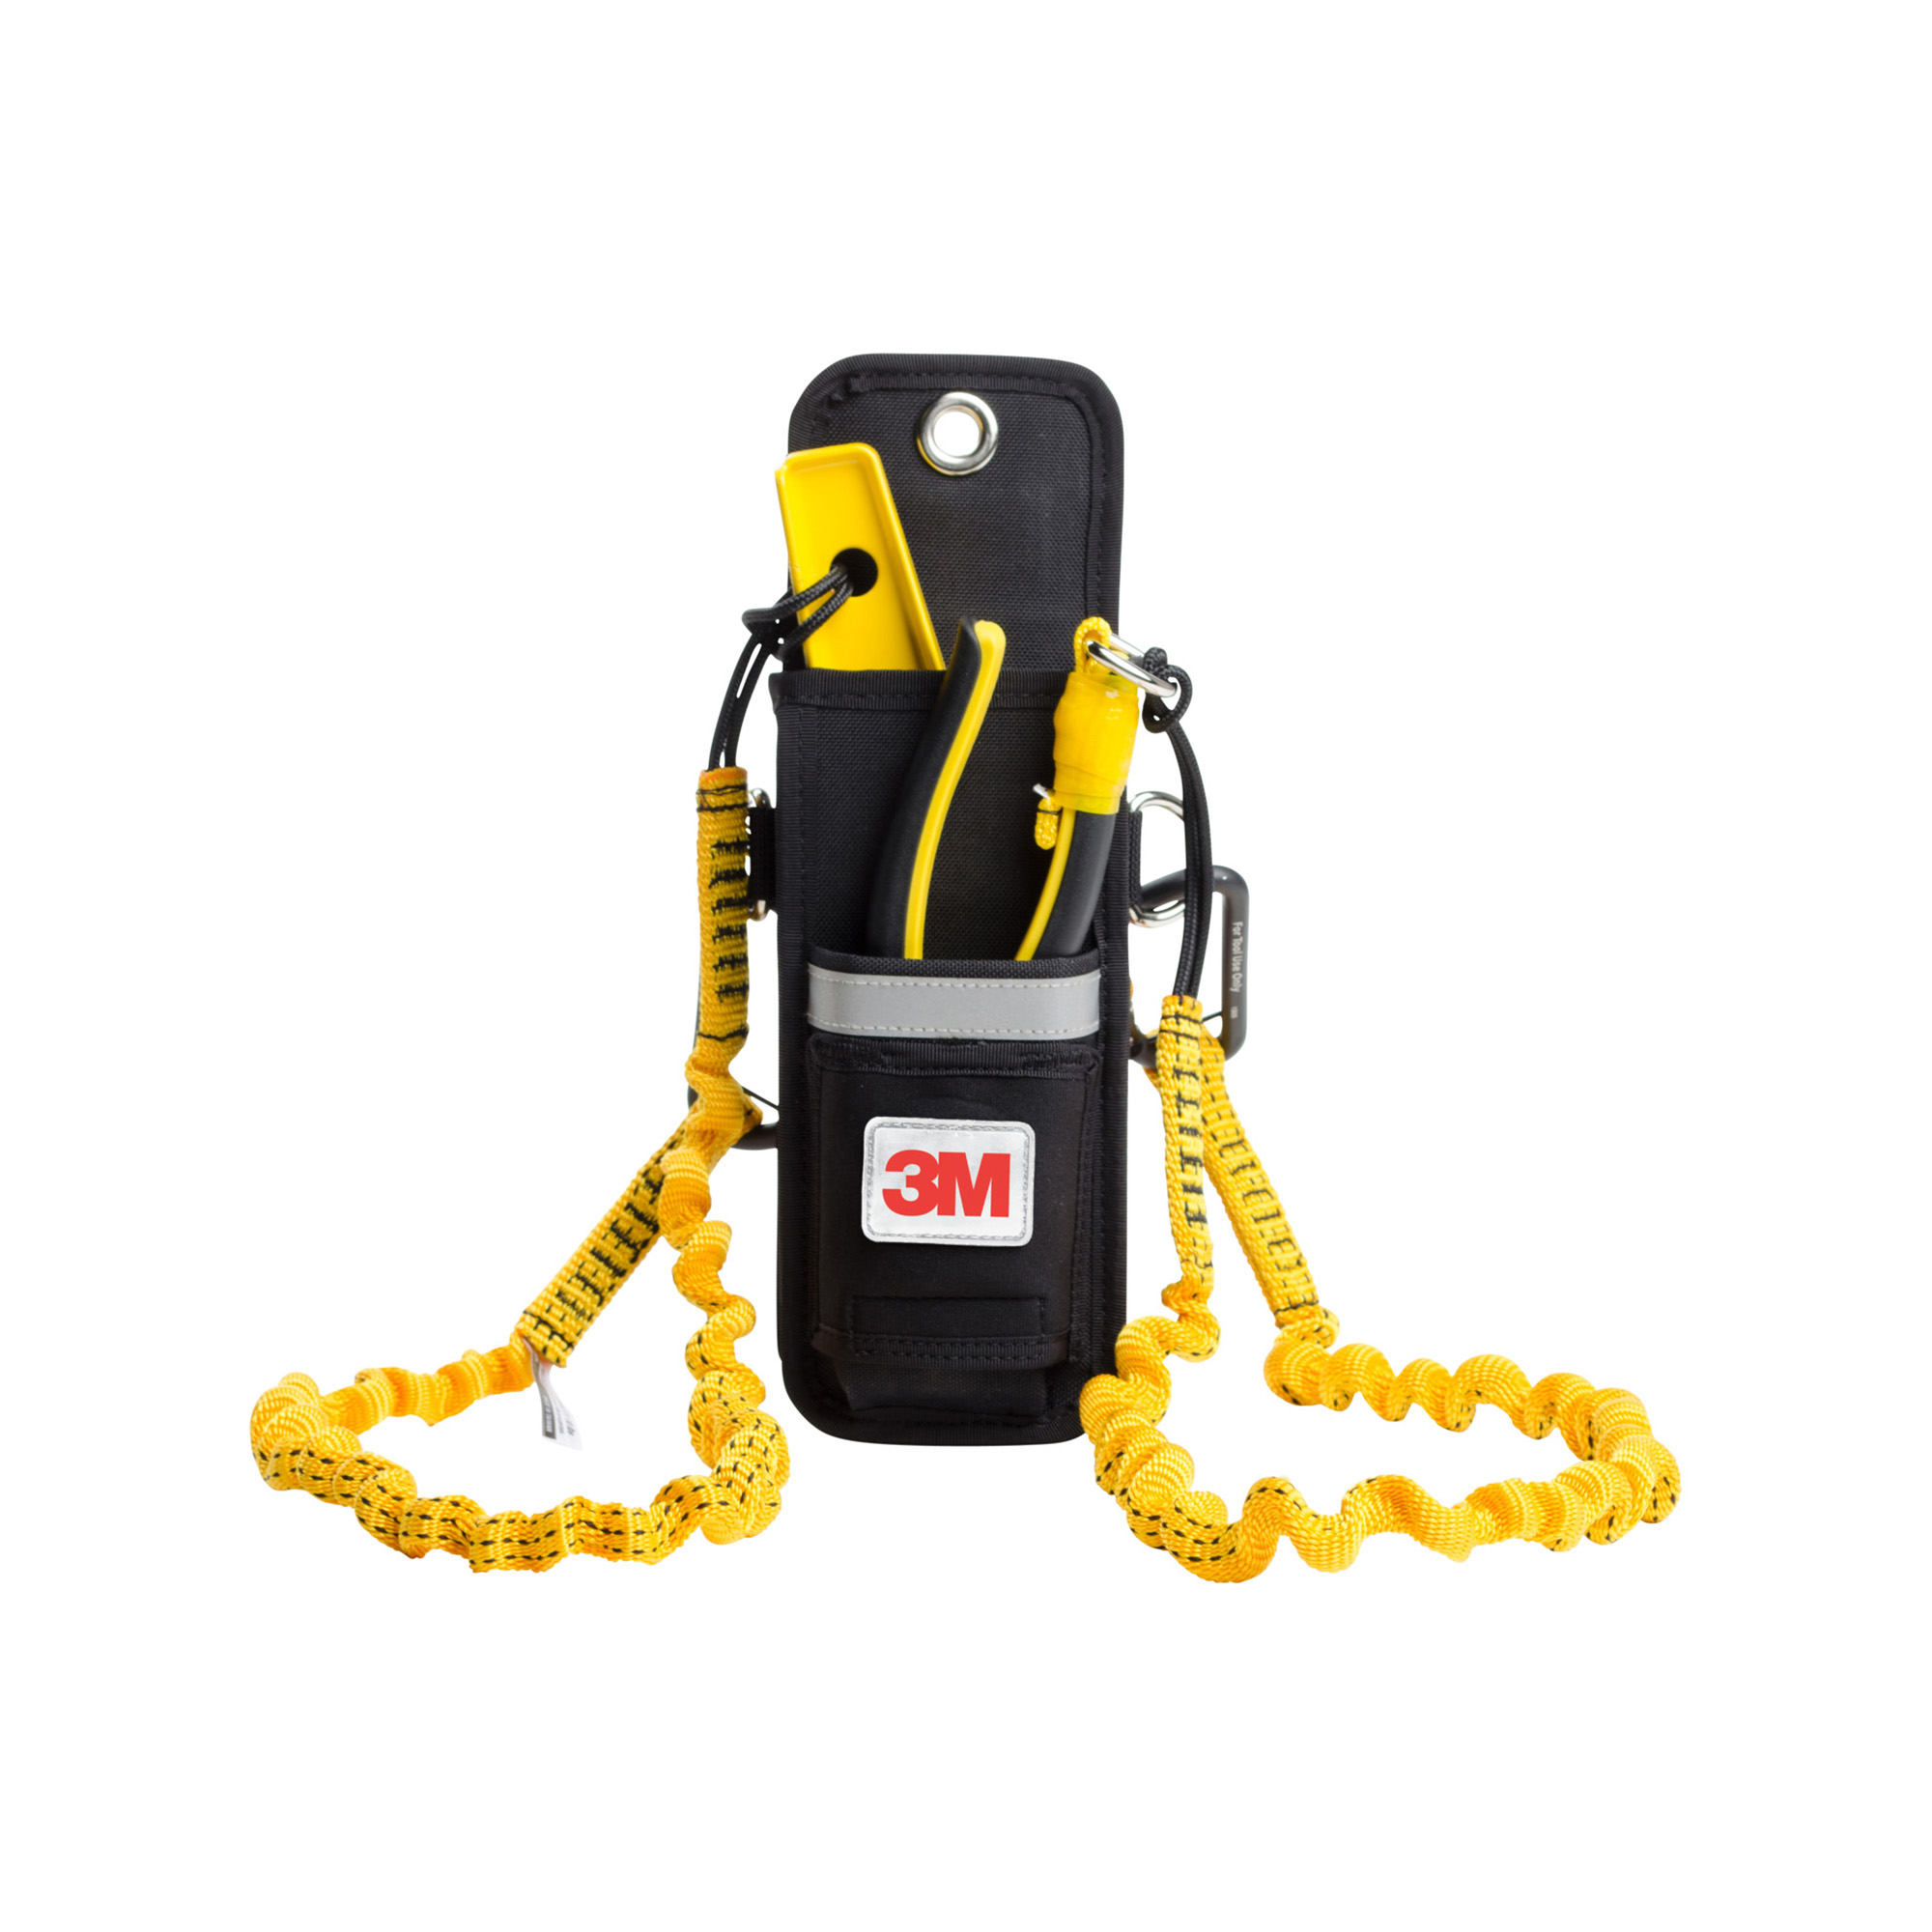 3M™ DBI-SALA® Magnetic Tool Holster Connected to Waist Belt Protekta  Safety Gear